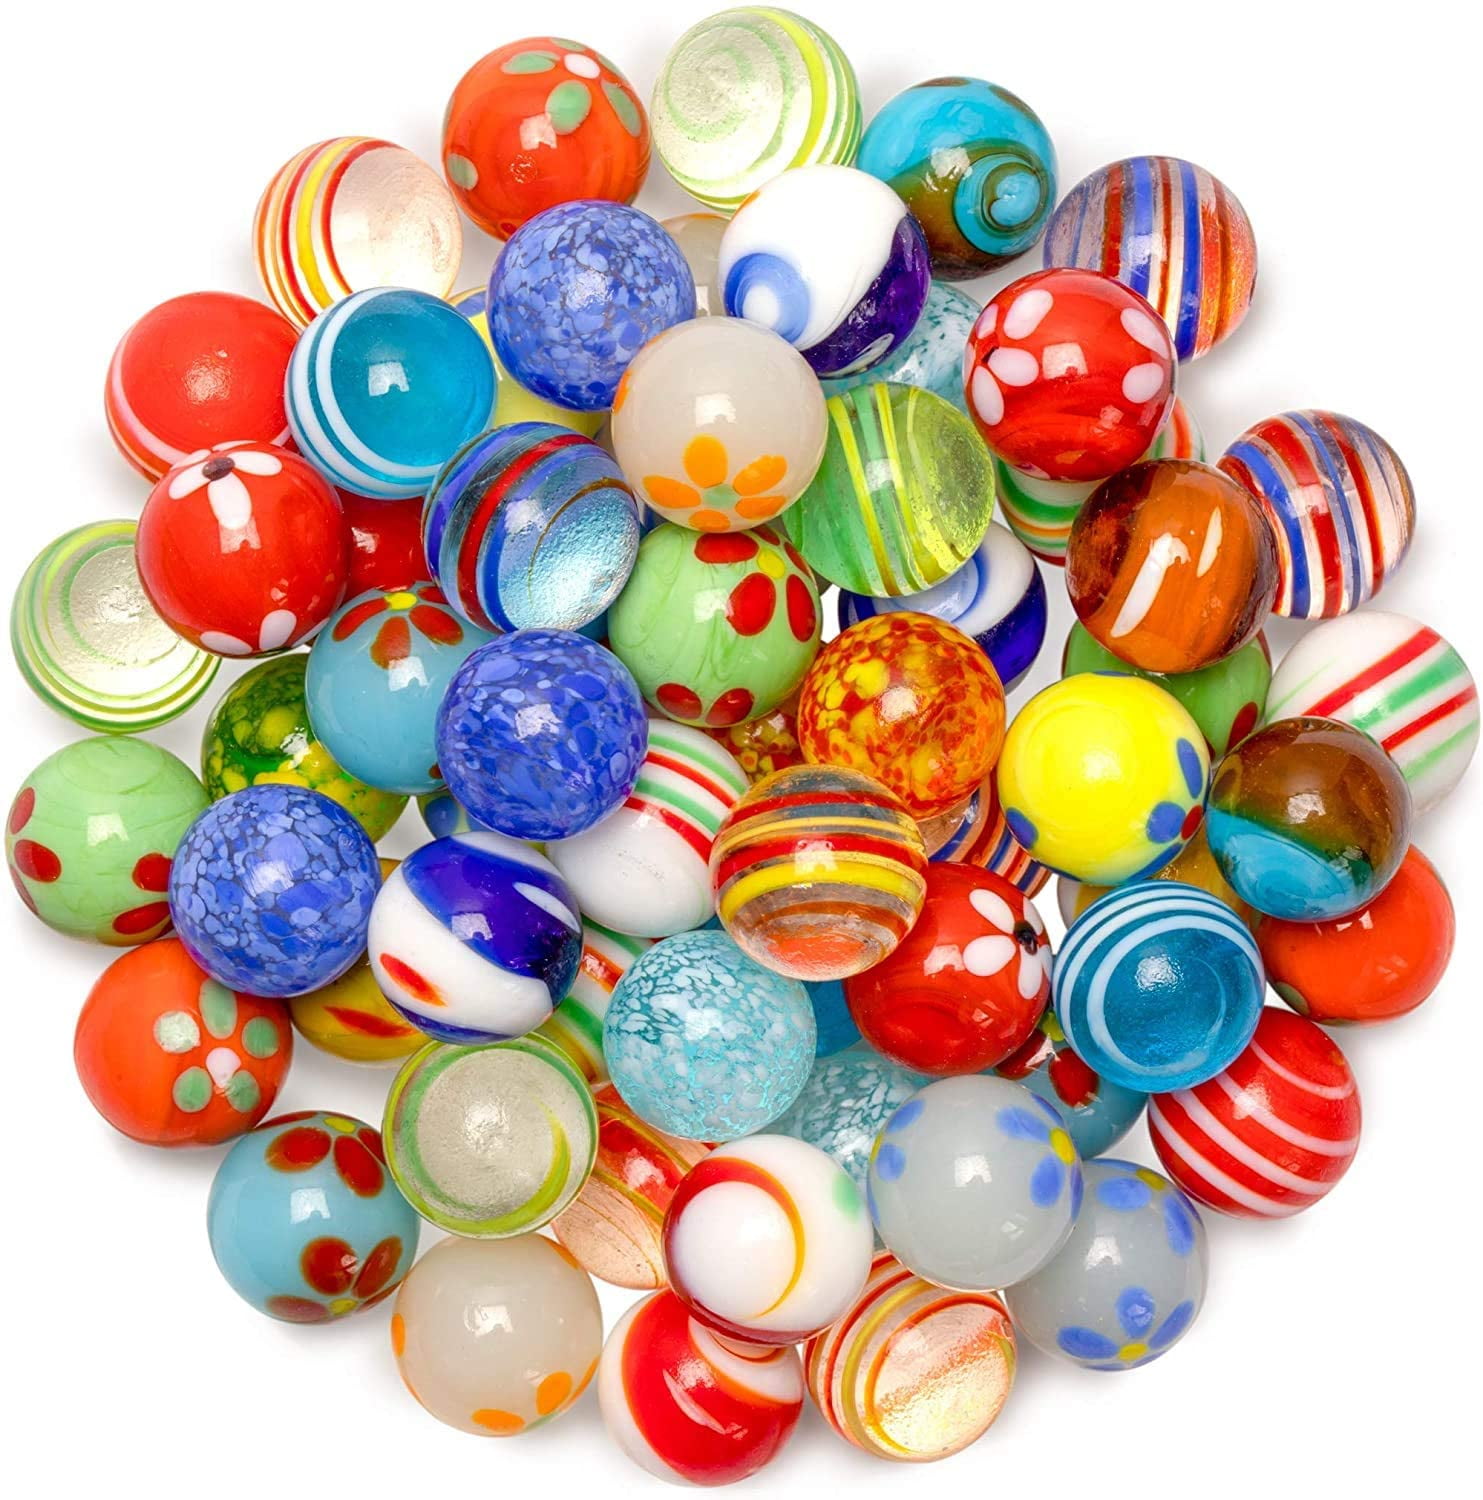 Glass Marbles, Ucradle Glass Beads, 30PCS 14 MM Marbles Colored Marble  Texture Glass Ball for Kids Used for Fish Tank, Home Decoration, Marble Run